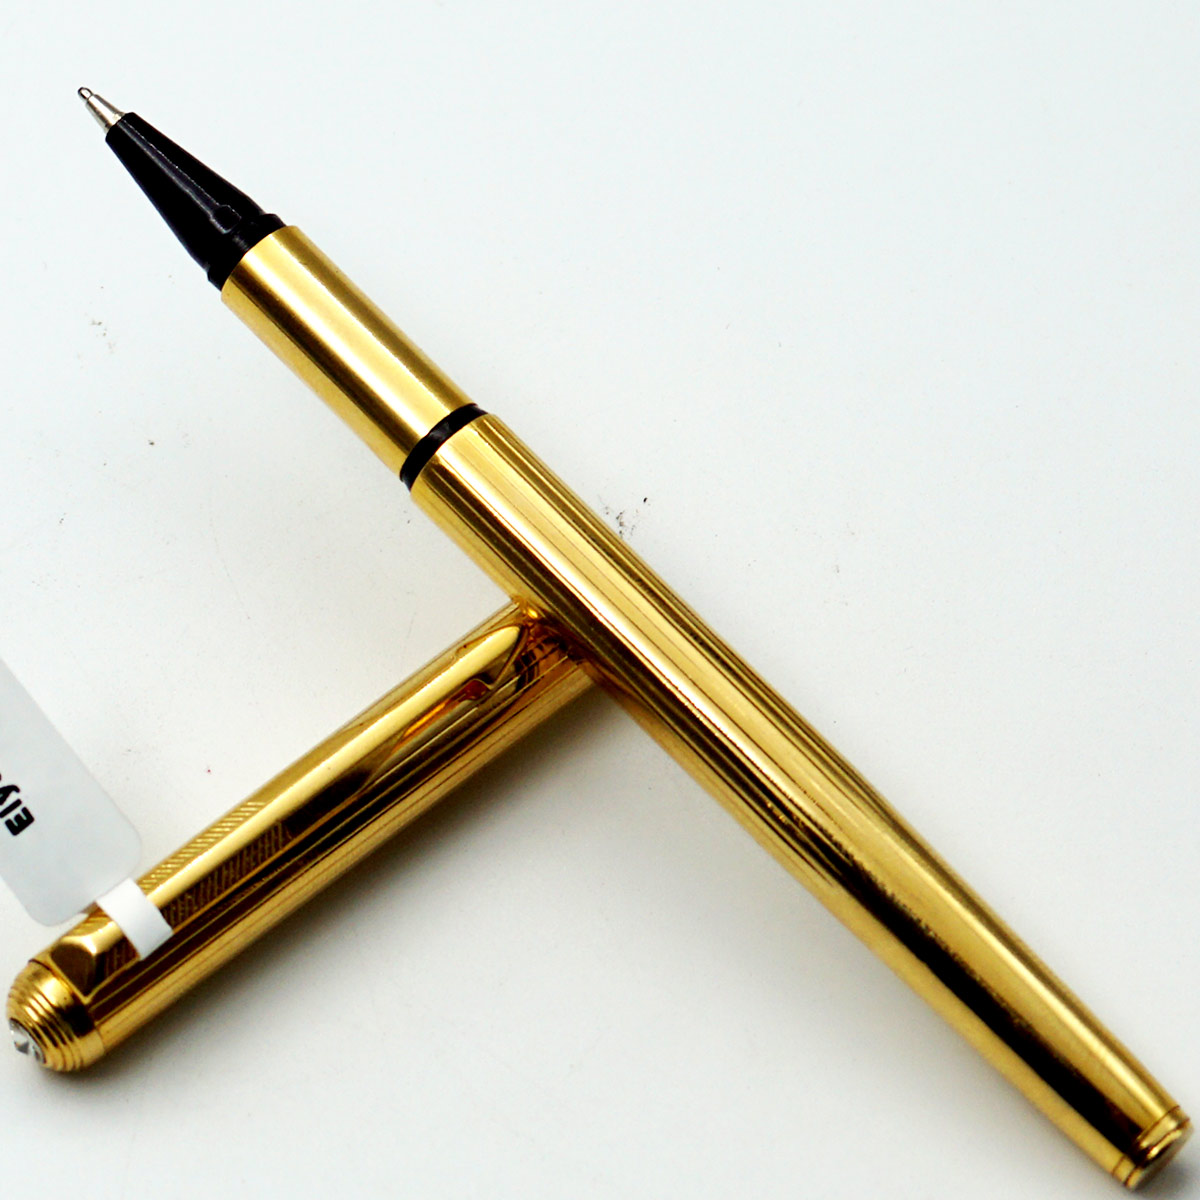 Elysee Golden Color Striped Body With Golden Color Clip And Cap On Stone Medium Tip Roller Ball Pen SKU 24661